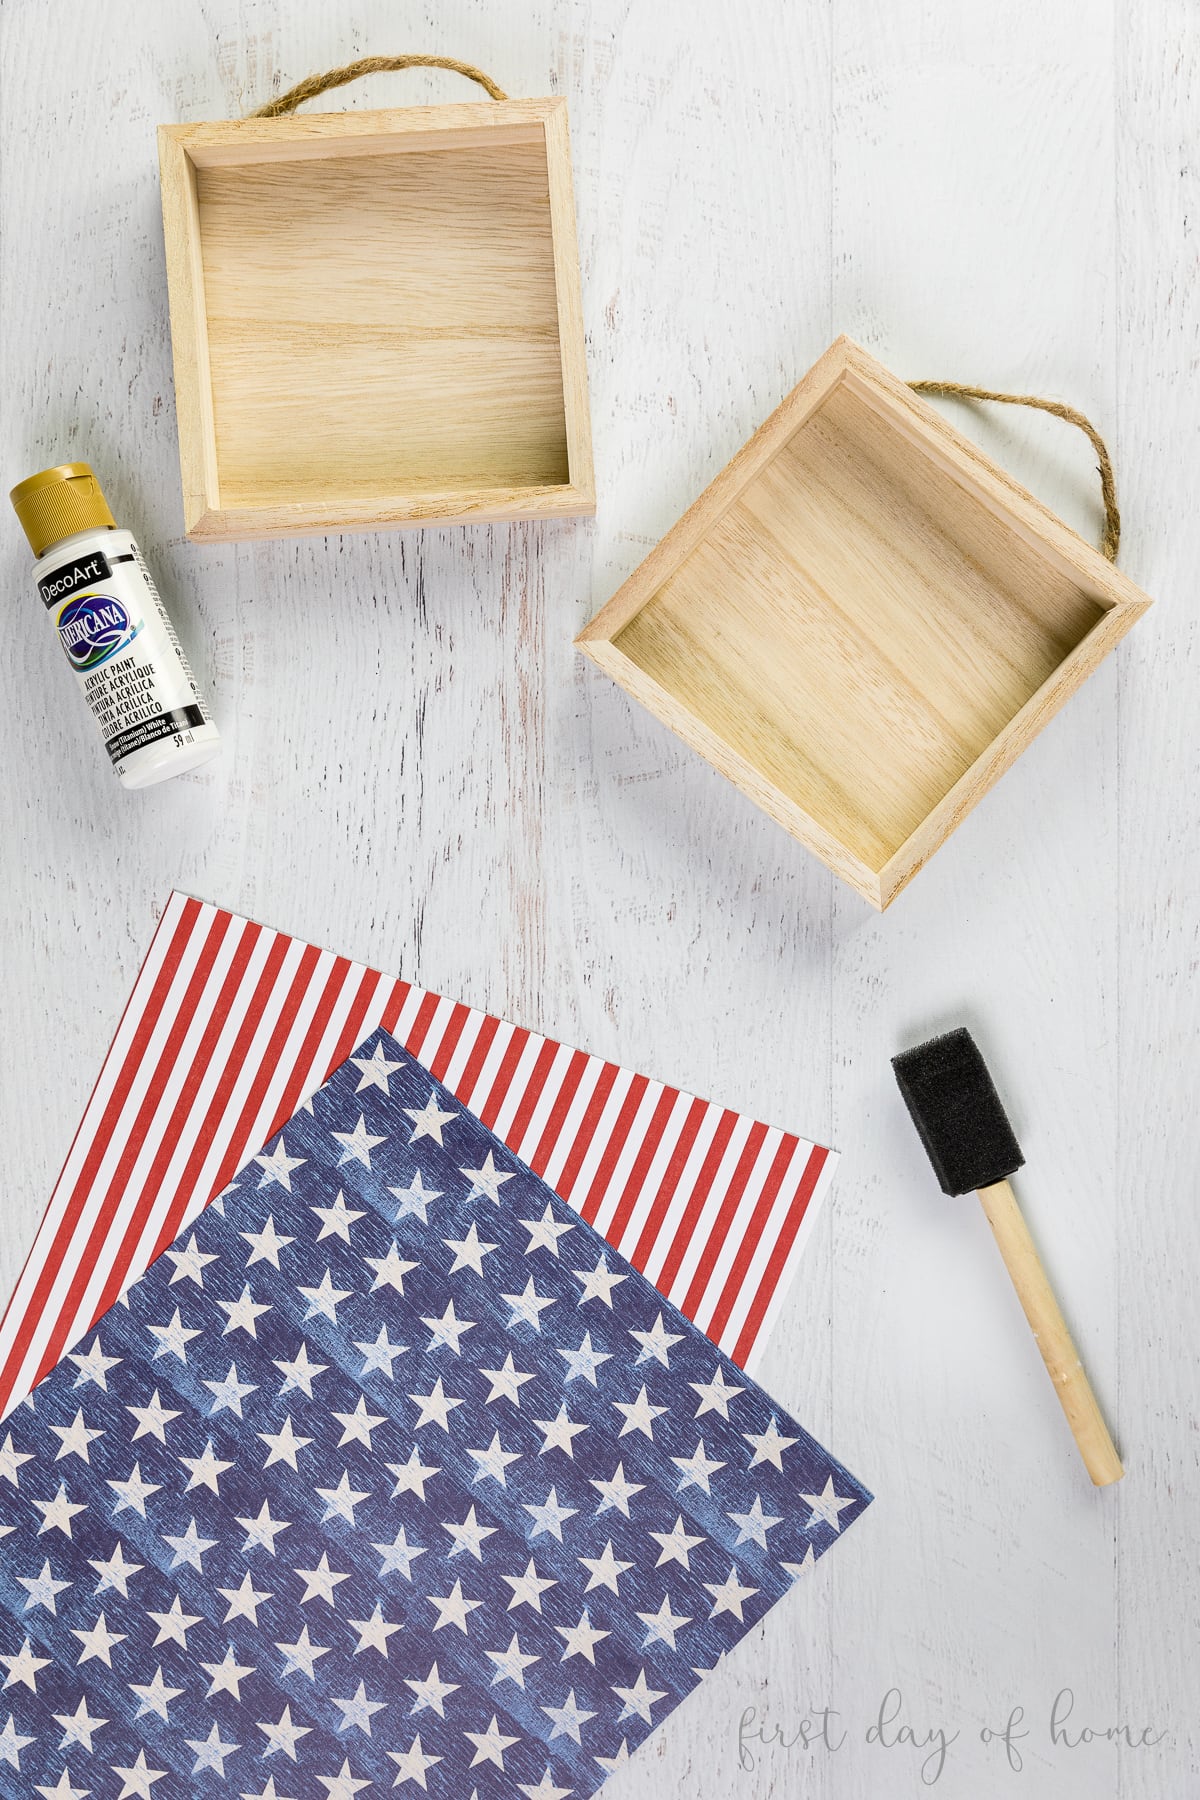 Supplies for patriotic wood signs, including wooden frames, scrapbook paper, paint brush, and acrylic paint